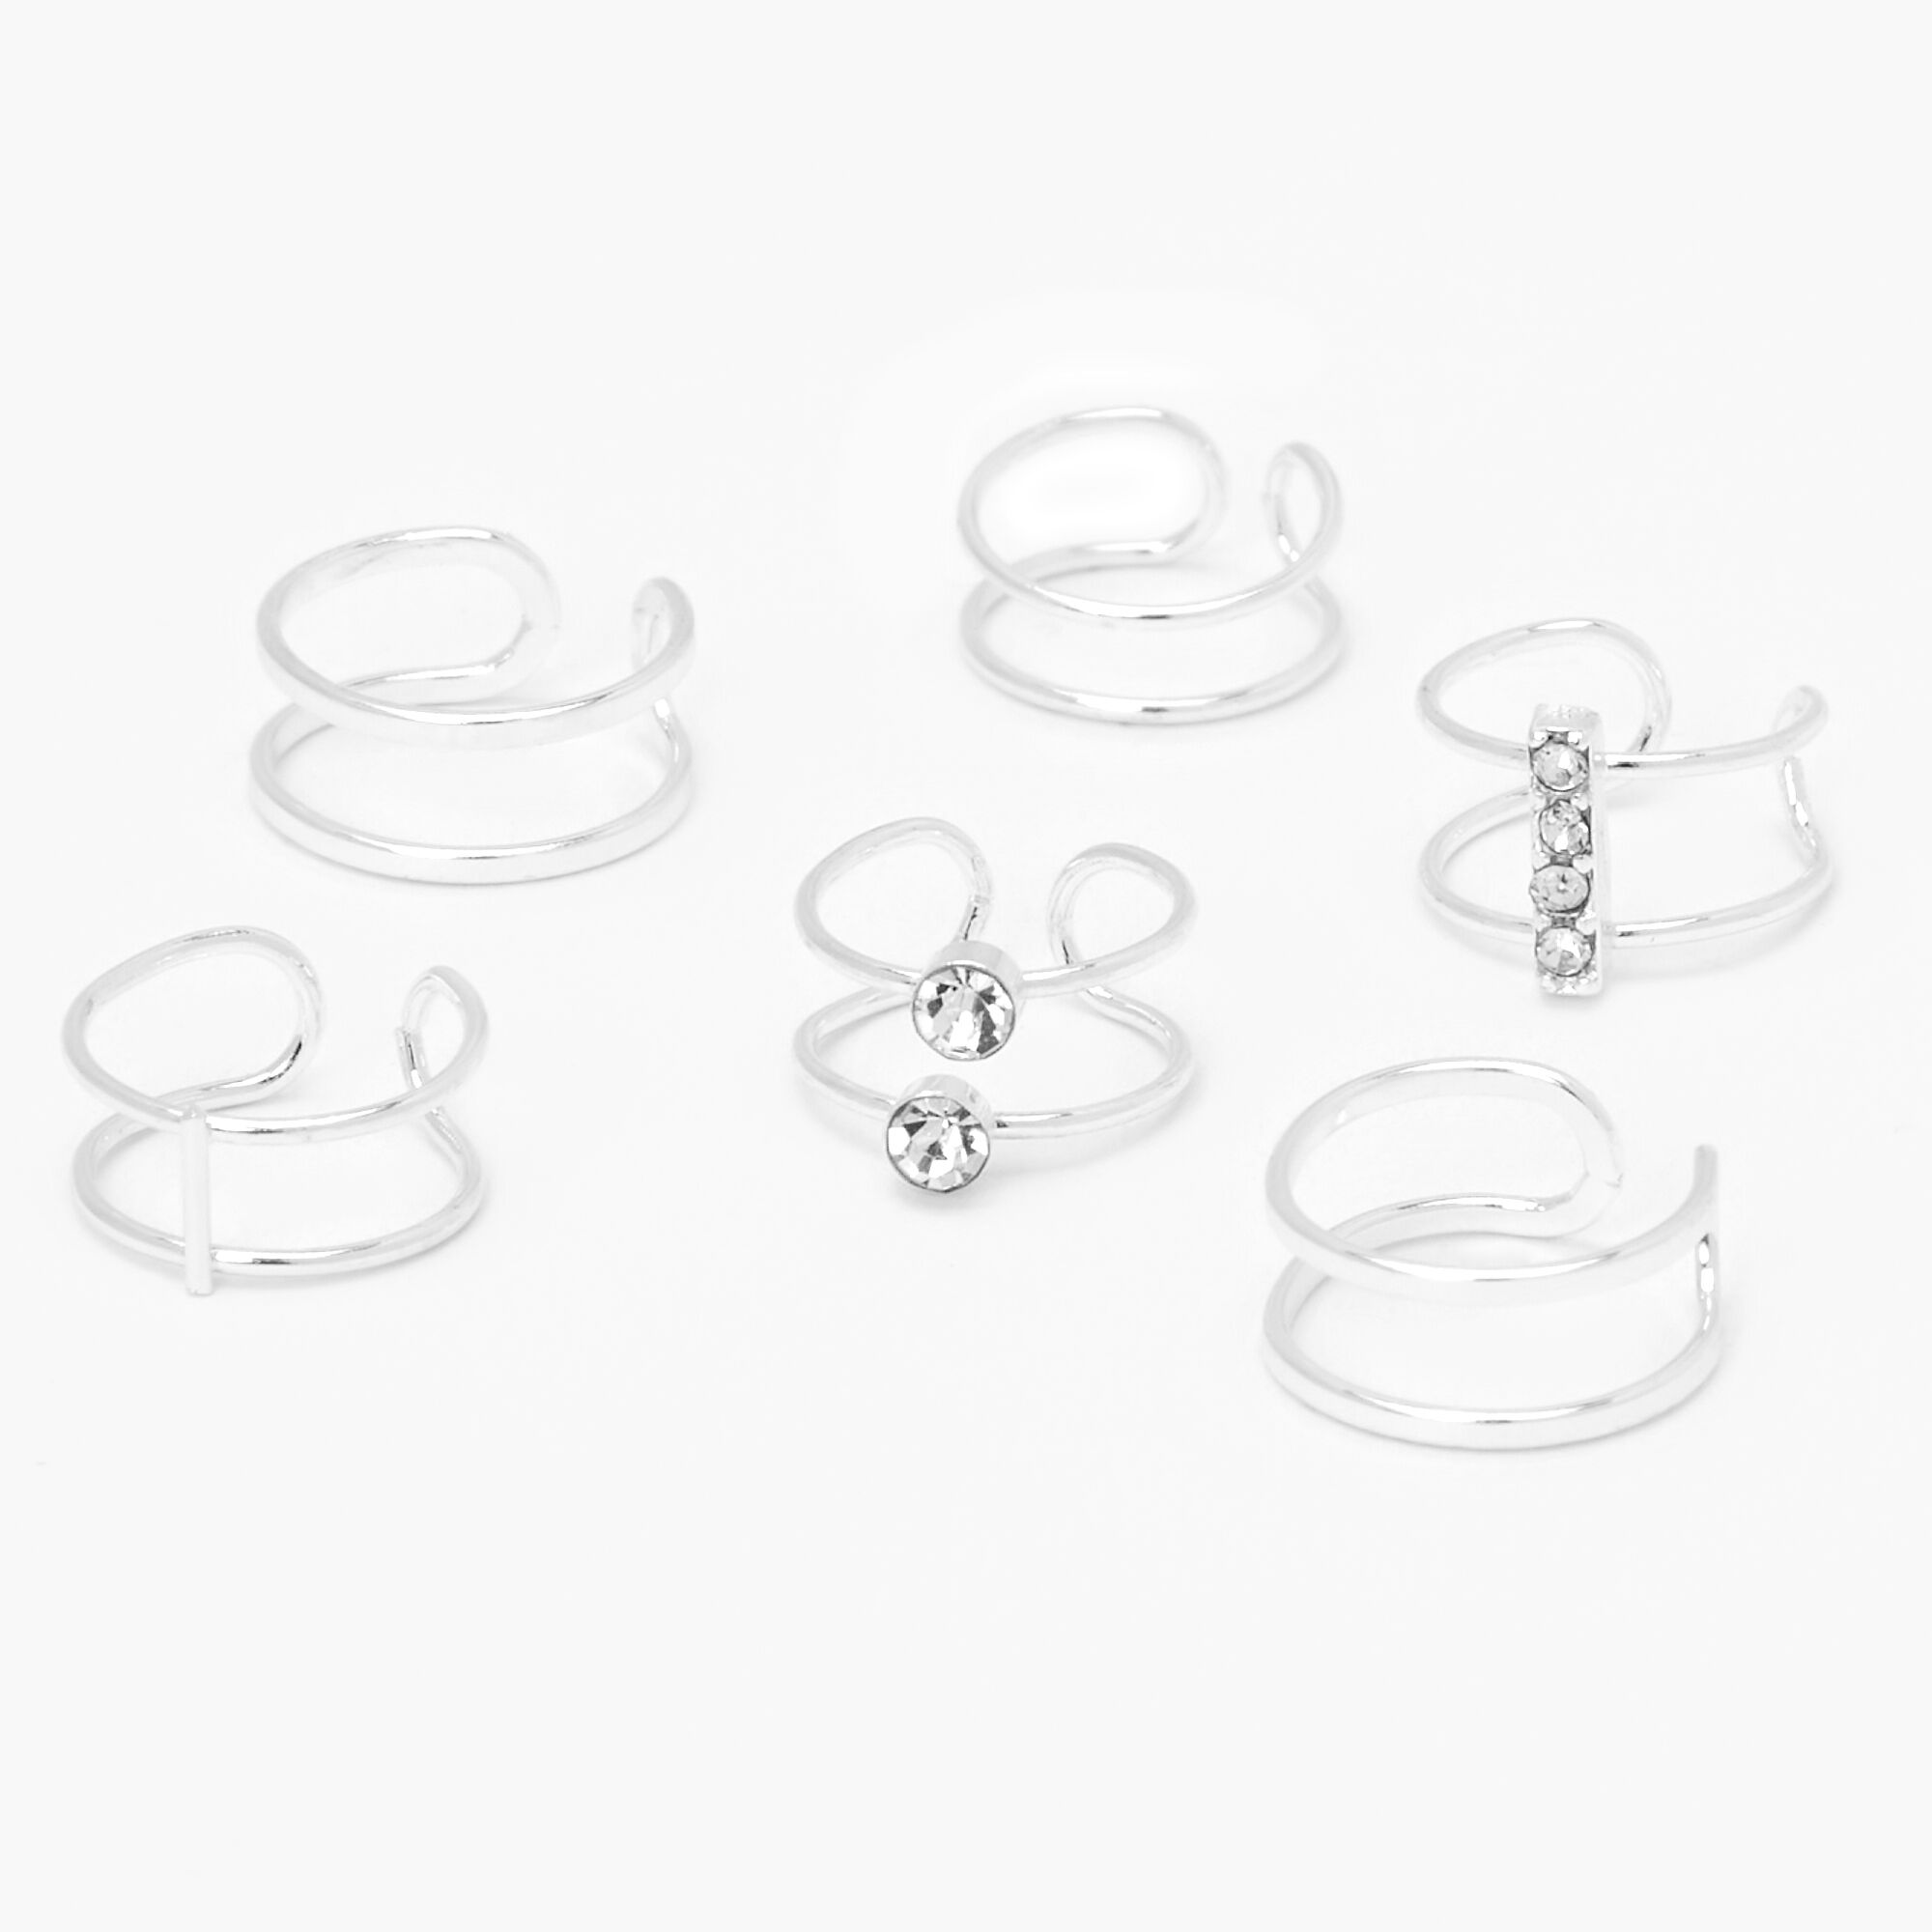 View Claires Cuff Earrings 5 Pack Silver information